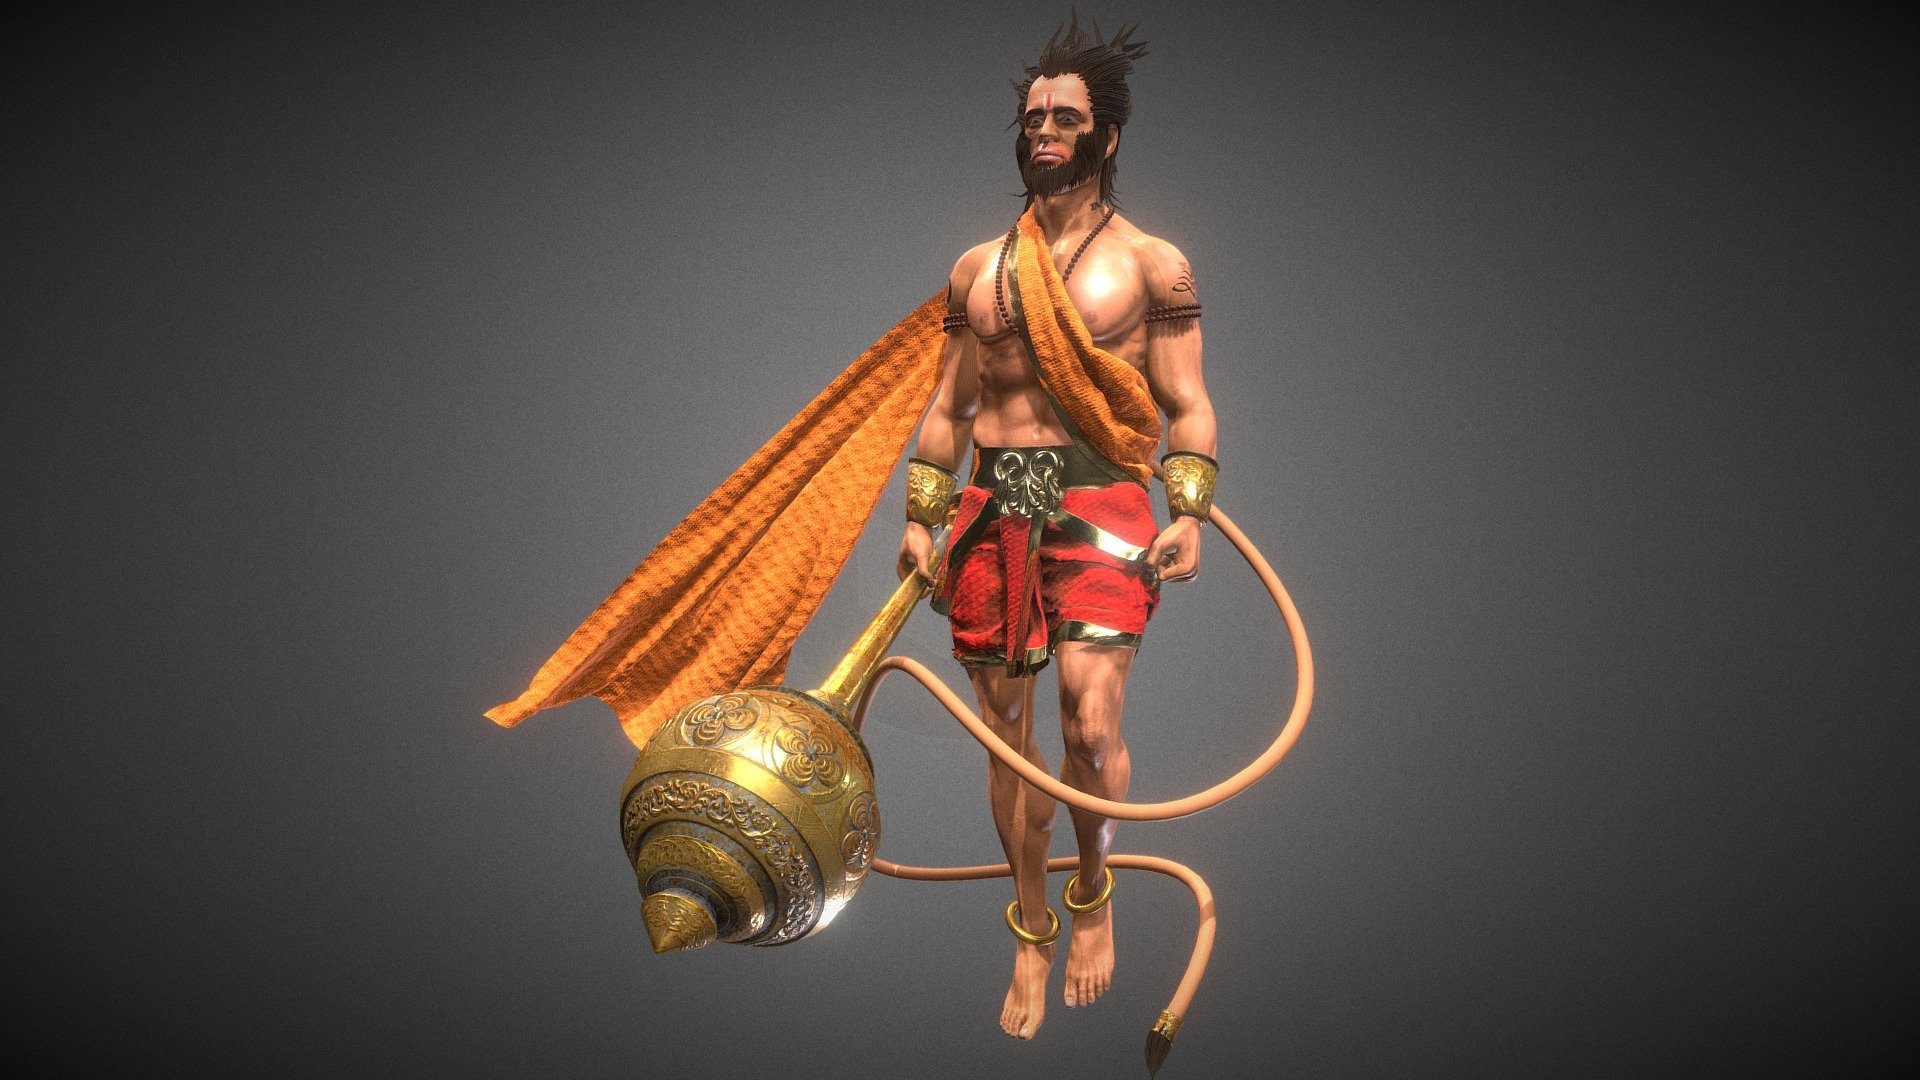 Shri Hanuman is one of the gods of Hindus. He is blessed by Vayu as the god of winds. Hanuman’s image shows him as a strong man with the face of a monkey. He also has a tail it represents the morality, higher pride of being self. Hanuman was awarded boon of Immortality by Mother Sita ( Wife of Lord rama) and is still alive.🙏

Ram Duaare Tum Rakhvare. Hott Na Aagya Binu Paisare.
Sab Sukh Lahe Tumhari Sarna. Tum Rakshak Kahu Ko Dar Na 3d model